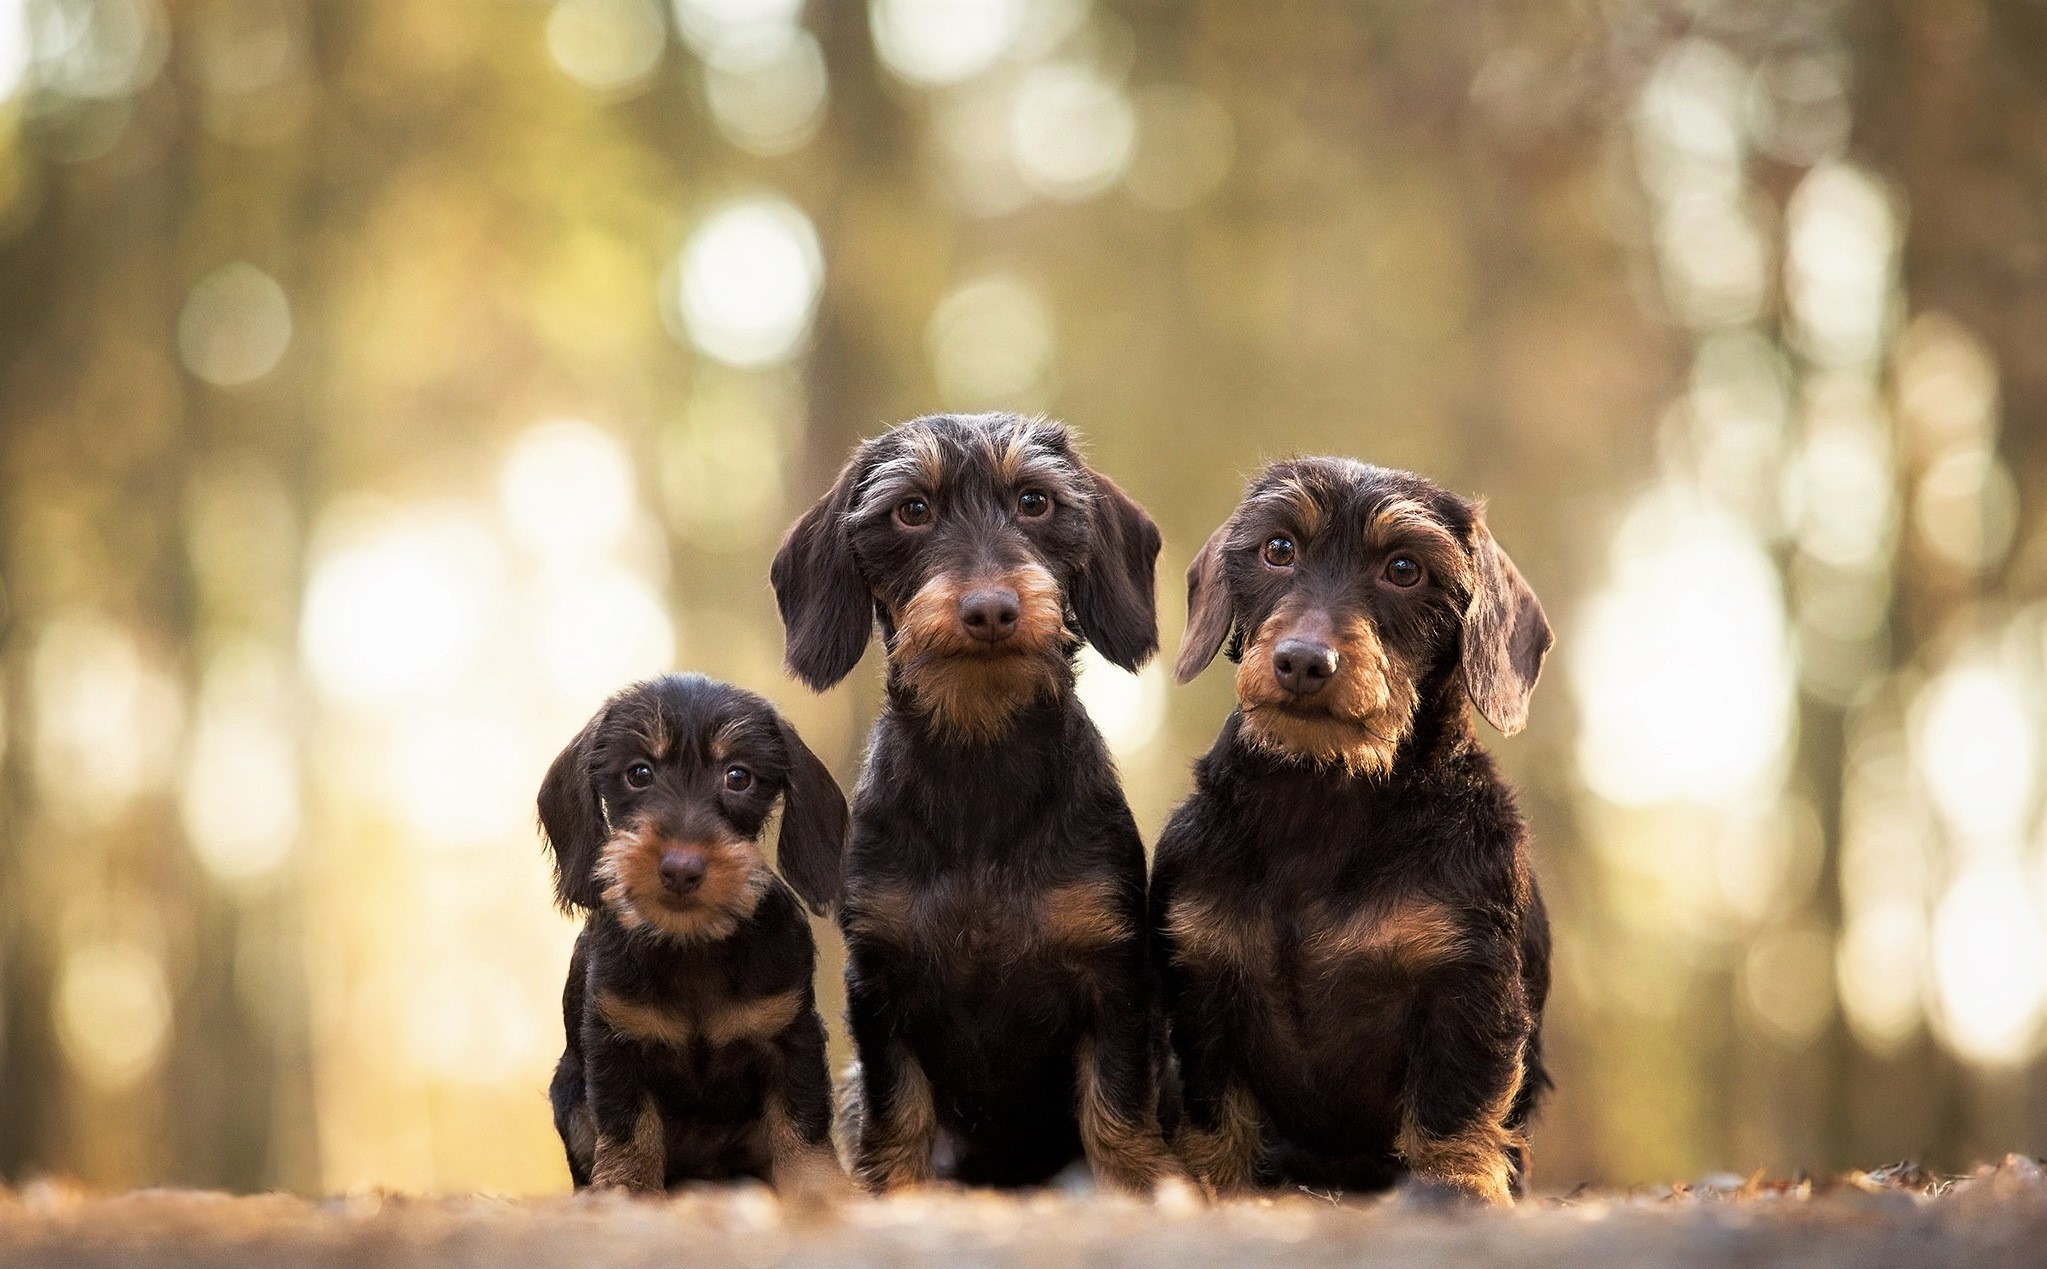 Baby Animal Cute Dog Pet Puppy Wirehaired Dachshund 2047x1269